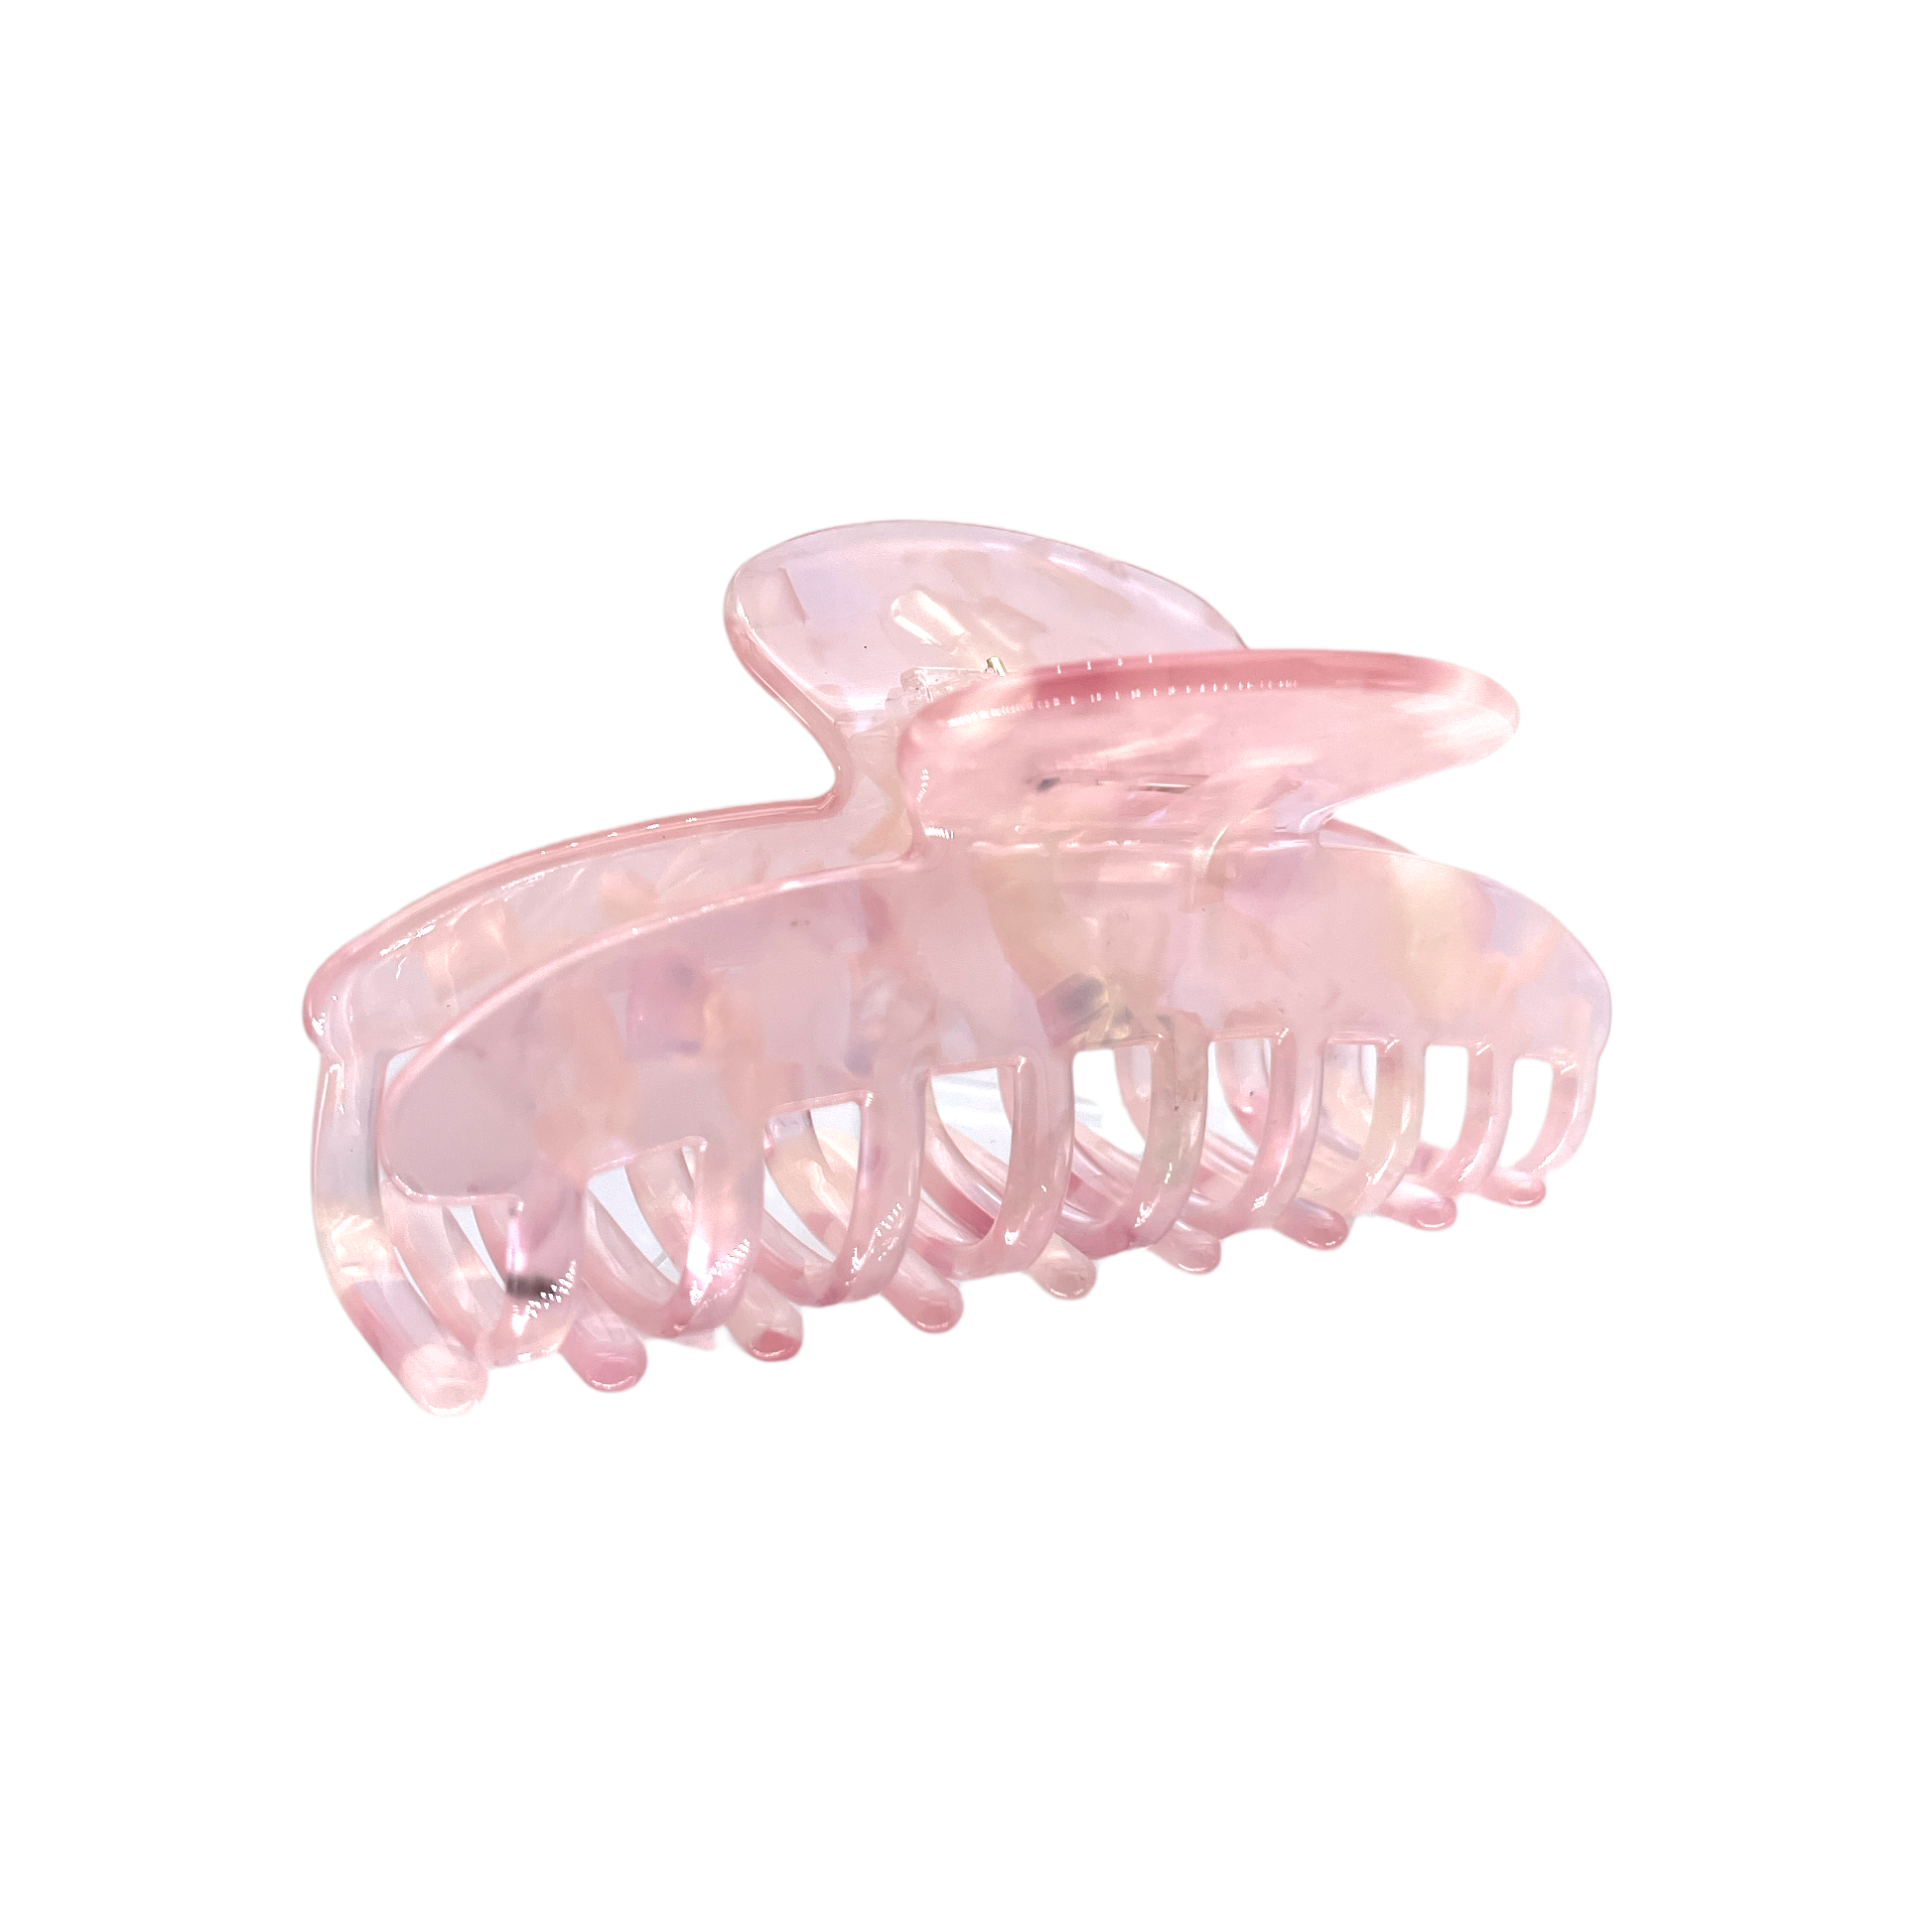 HCO-13M Oval Hair Clip-LT Pink Clear 4M